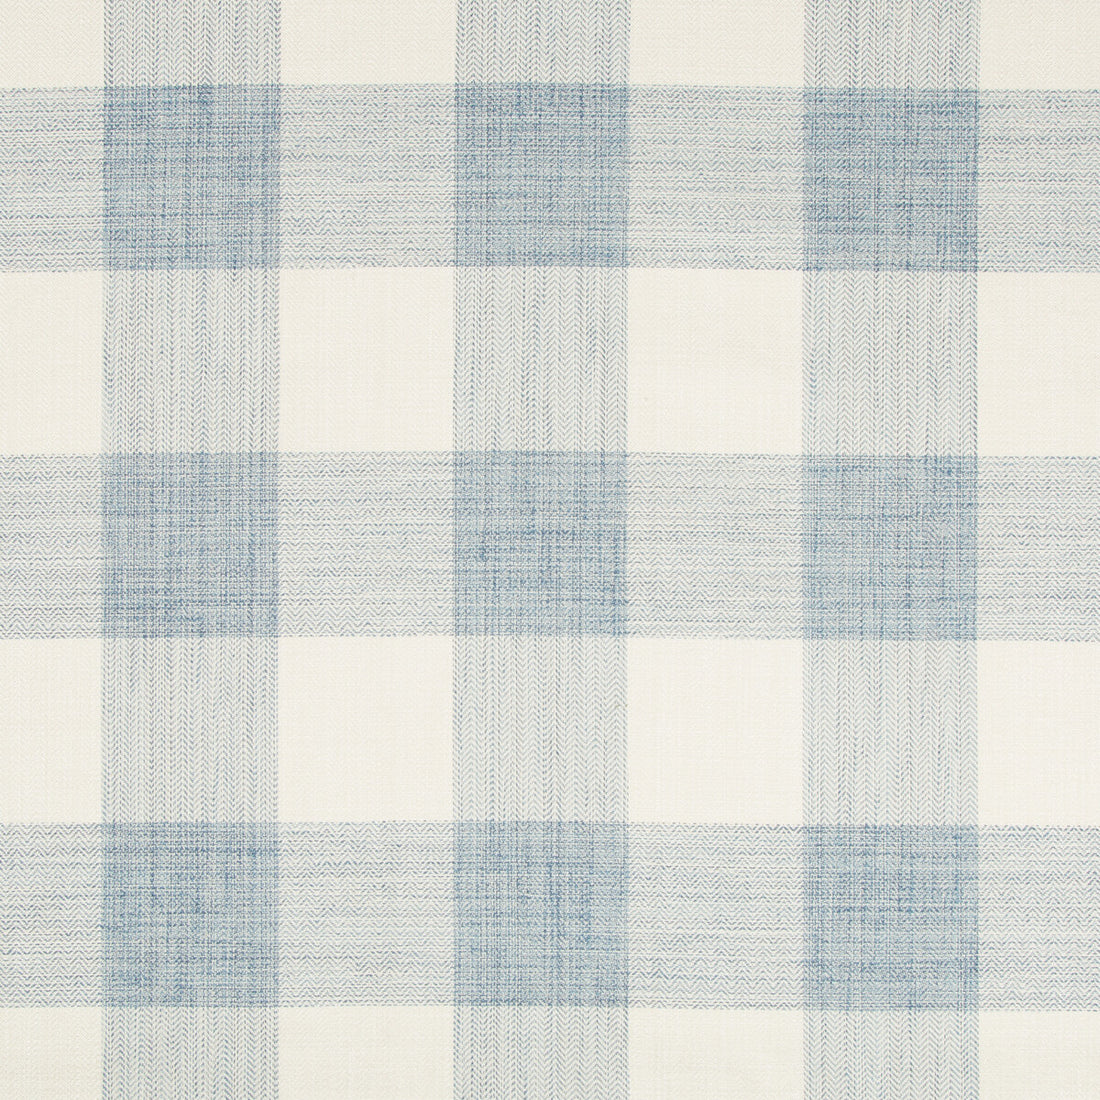 Barnsdale fabric in indigo color - pattern 35306.5.0 - by Kravet Basics in the Greenwich collection